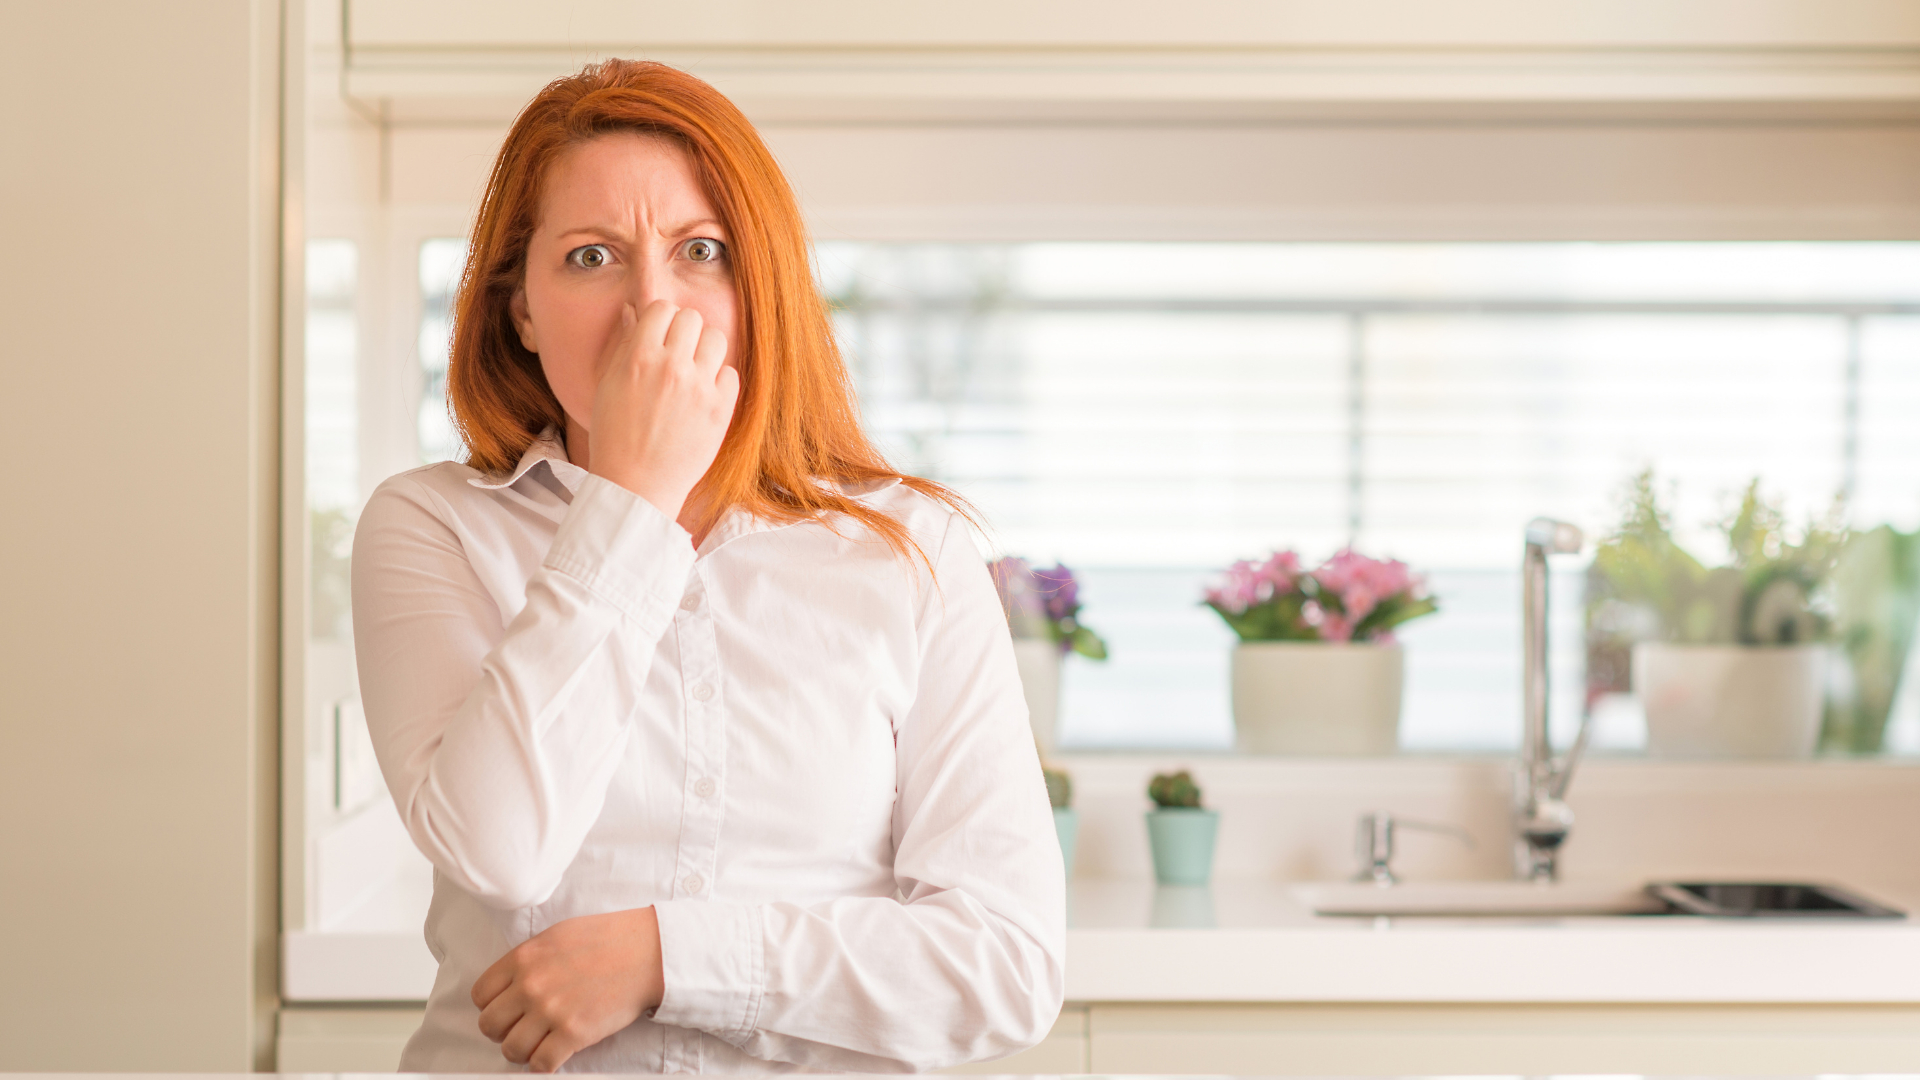 5 Tips For Banishing Those Weird Smells